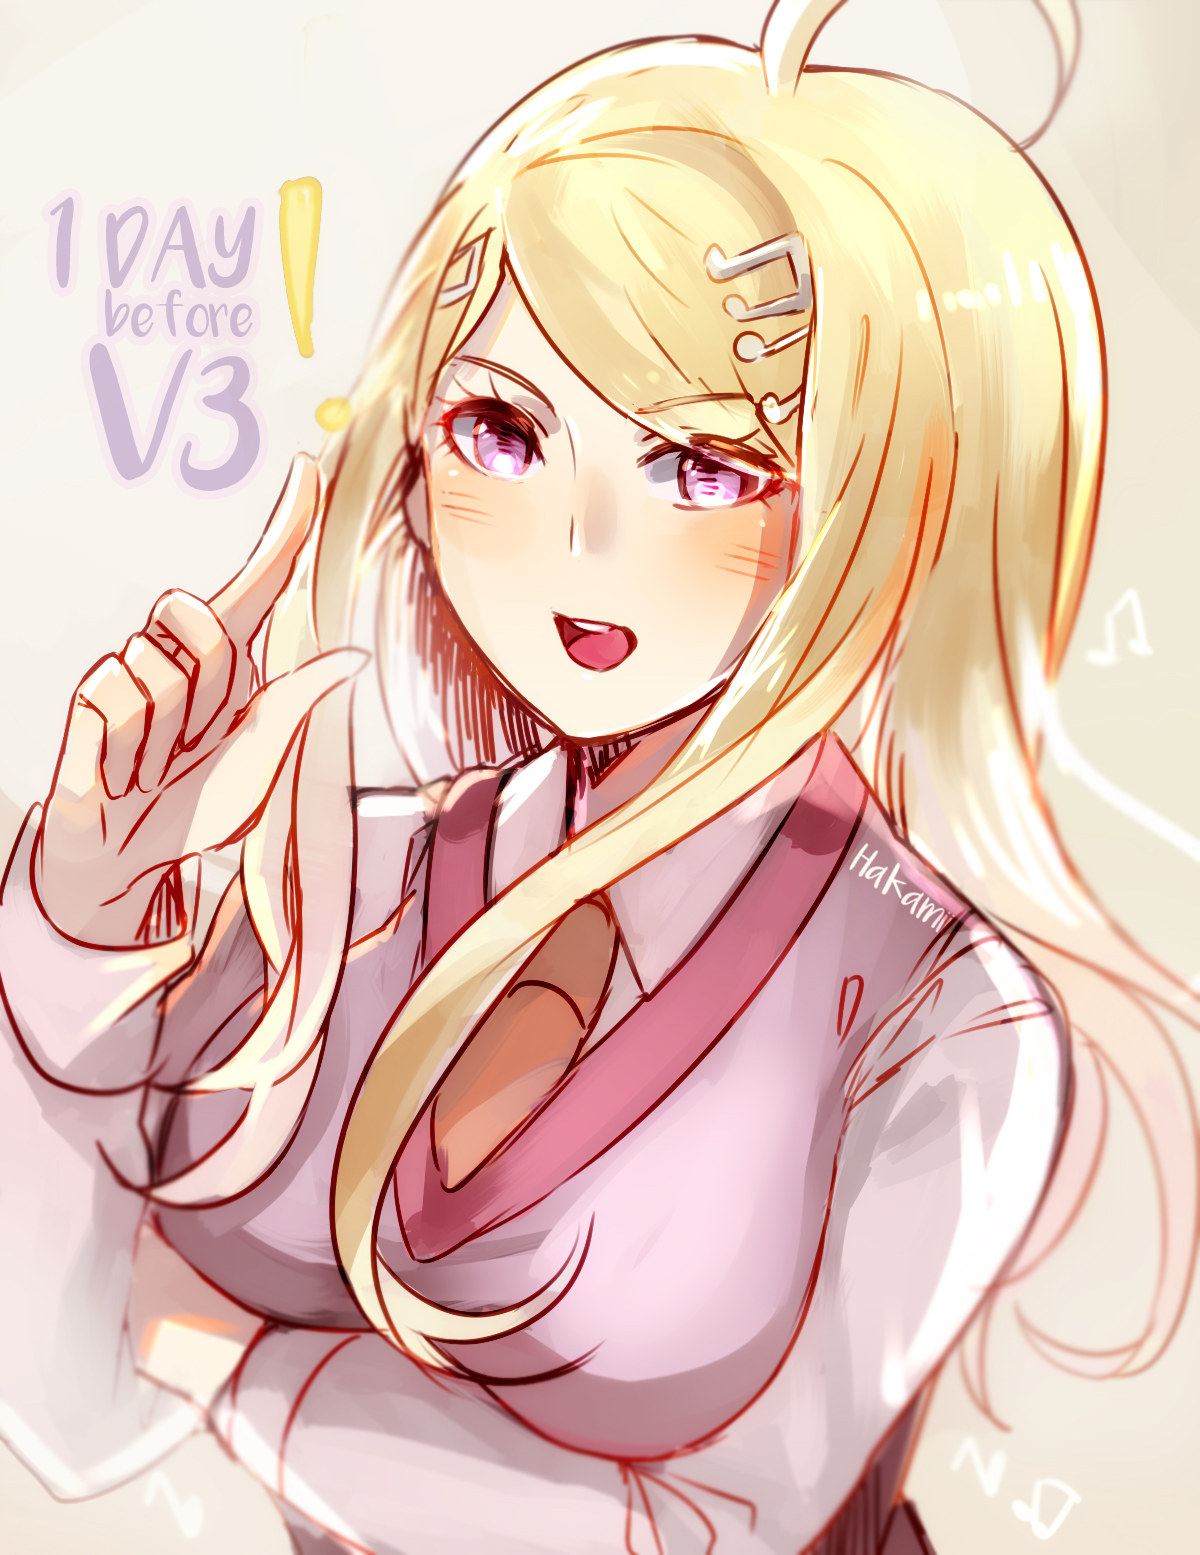 Countdown to V3